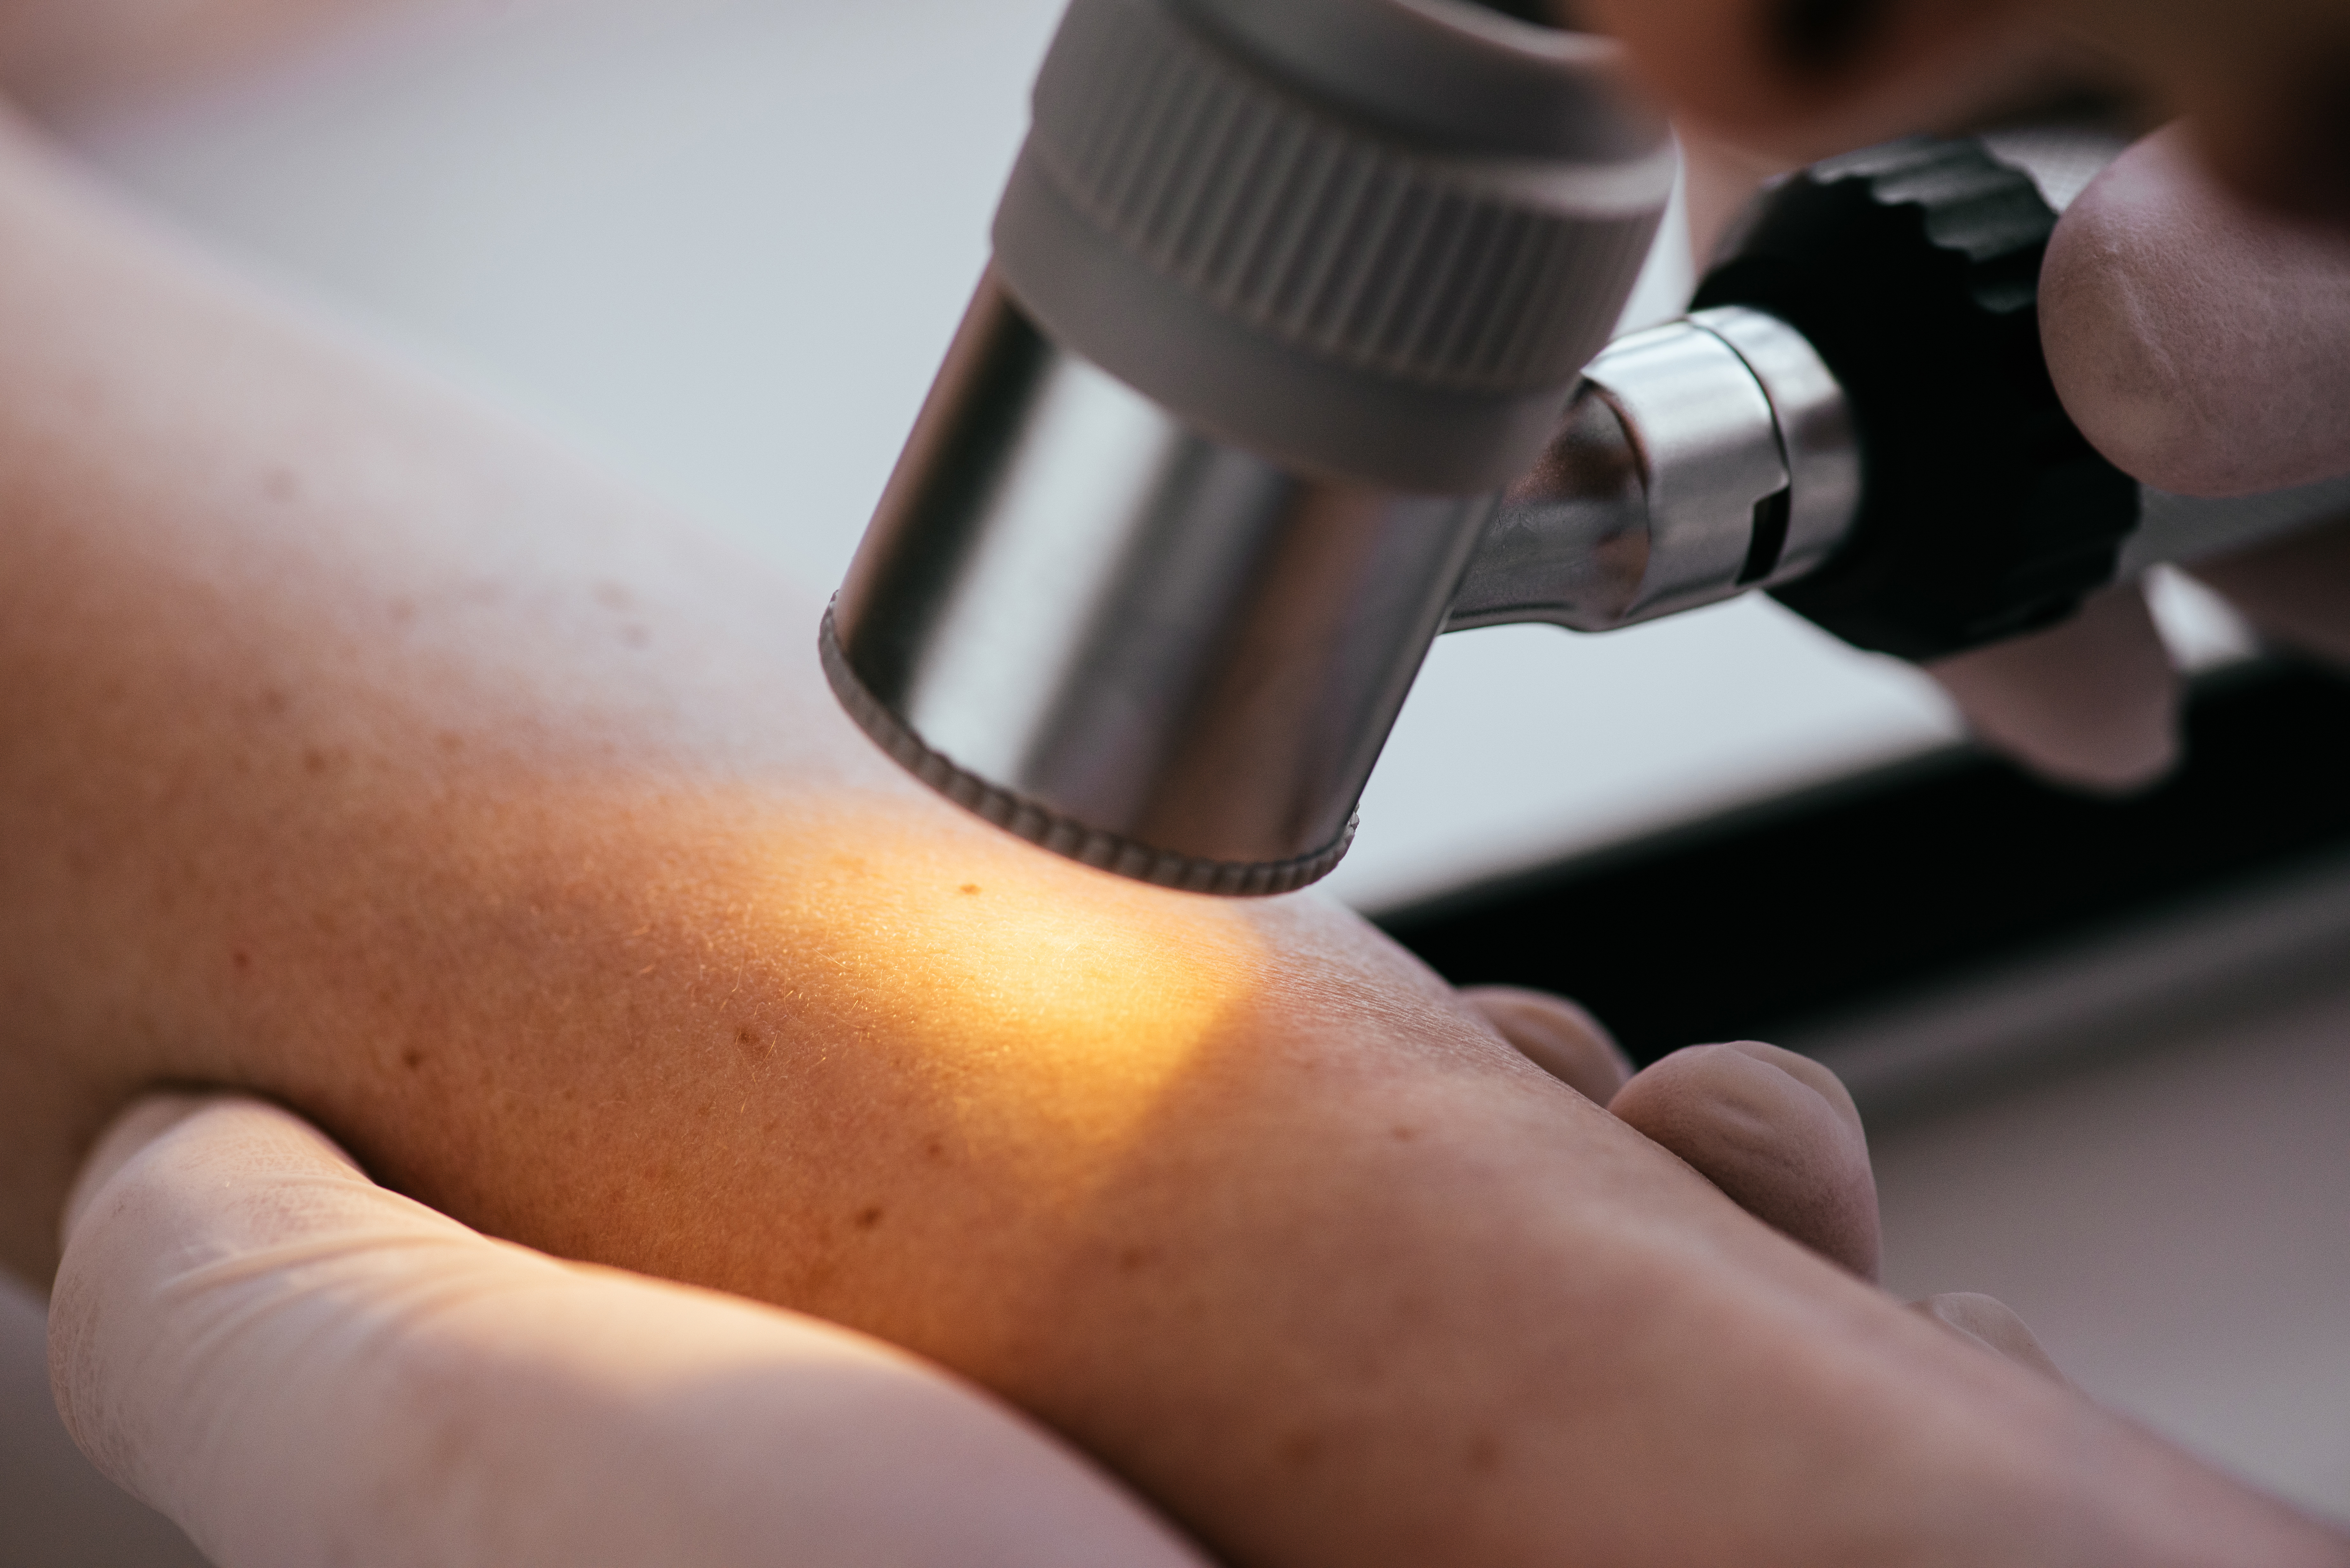 Does a Painful Mole Mean Melanoma and Should a Doctor See It?